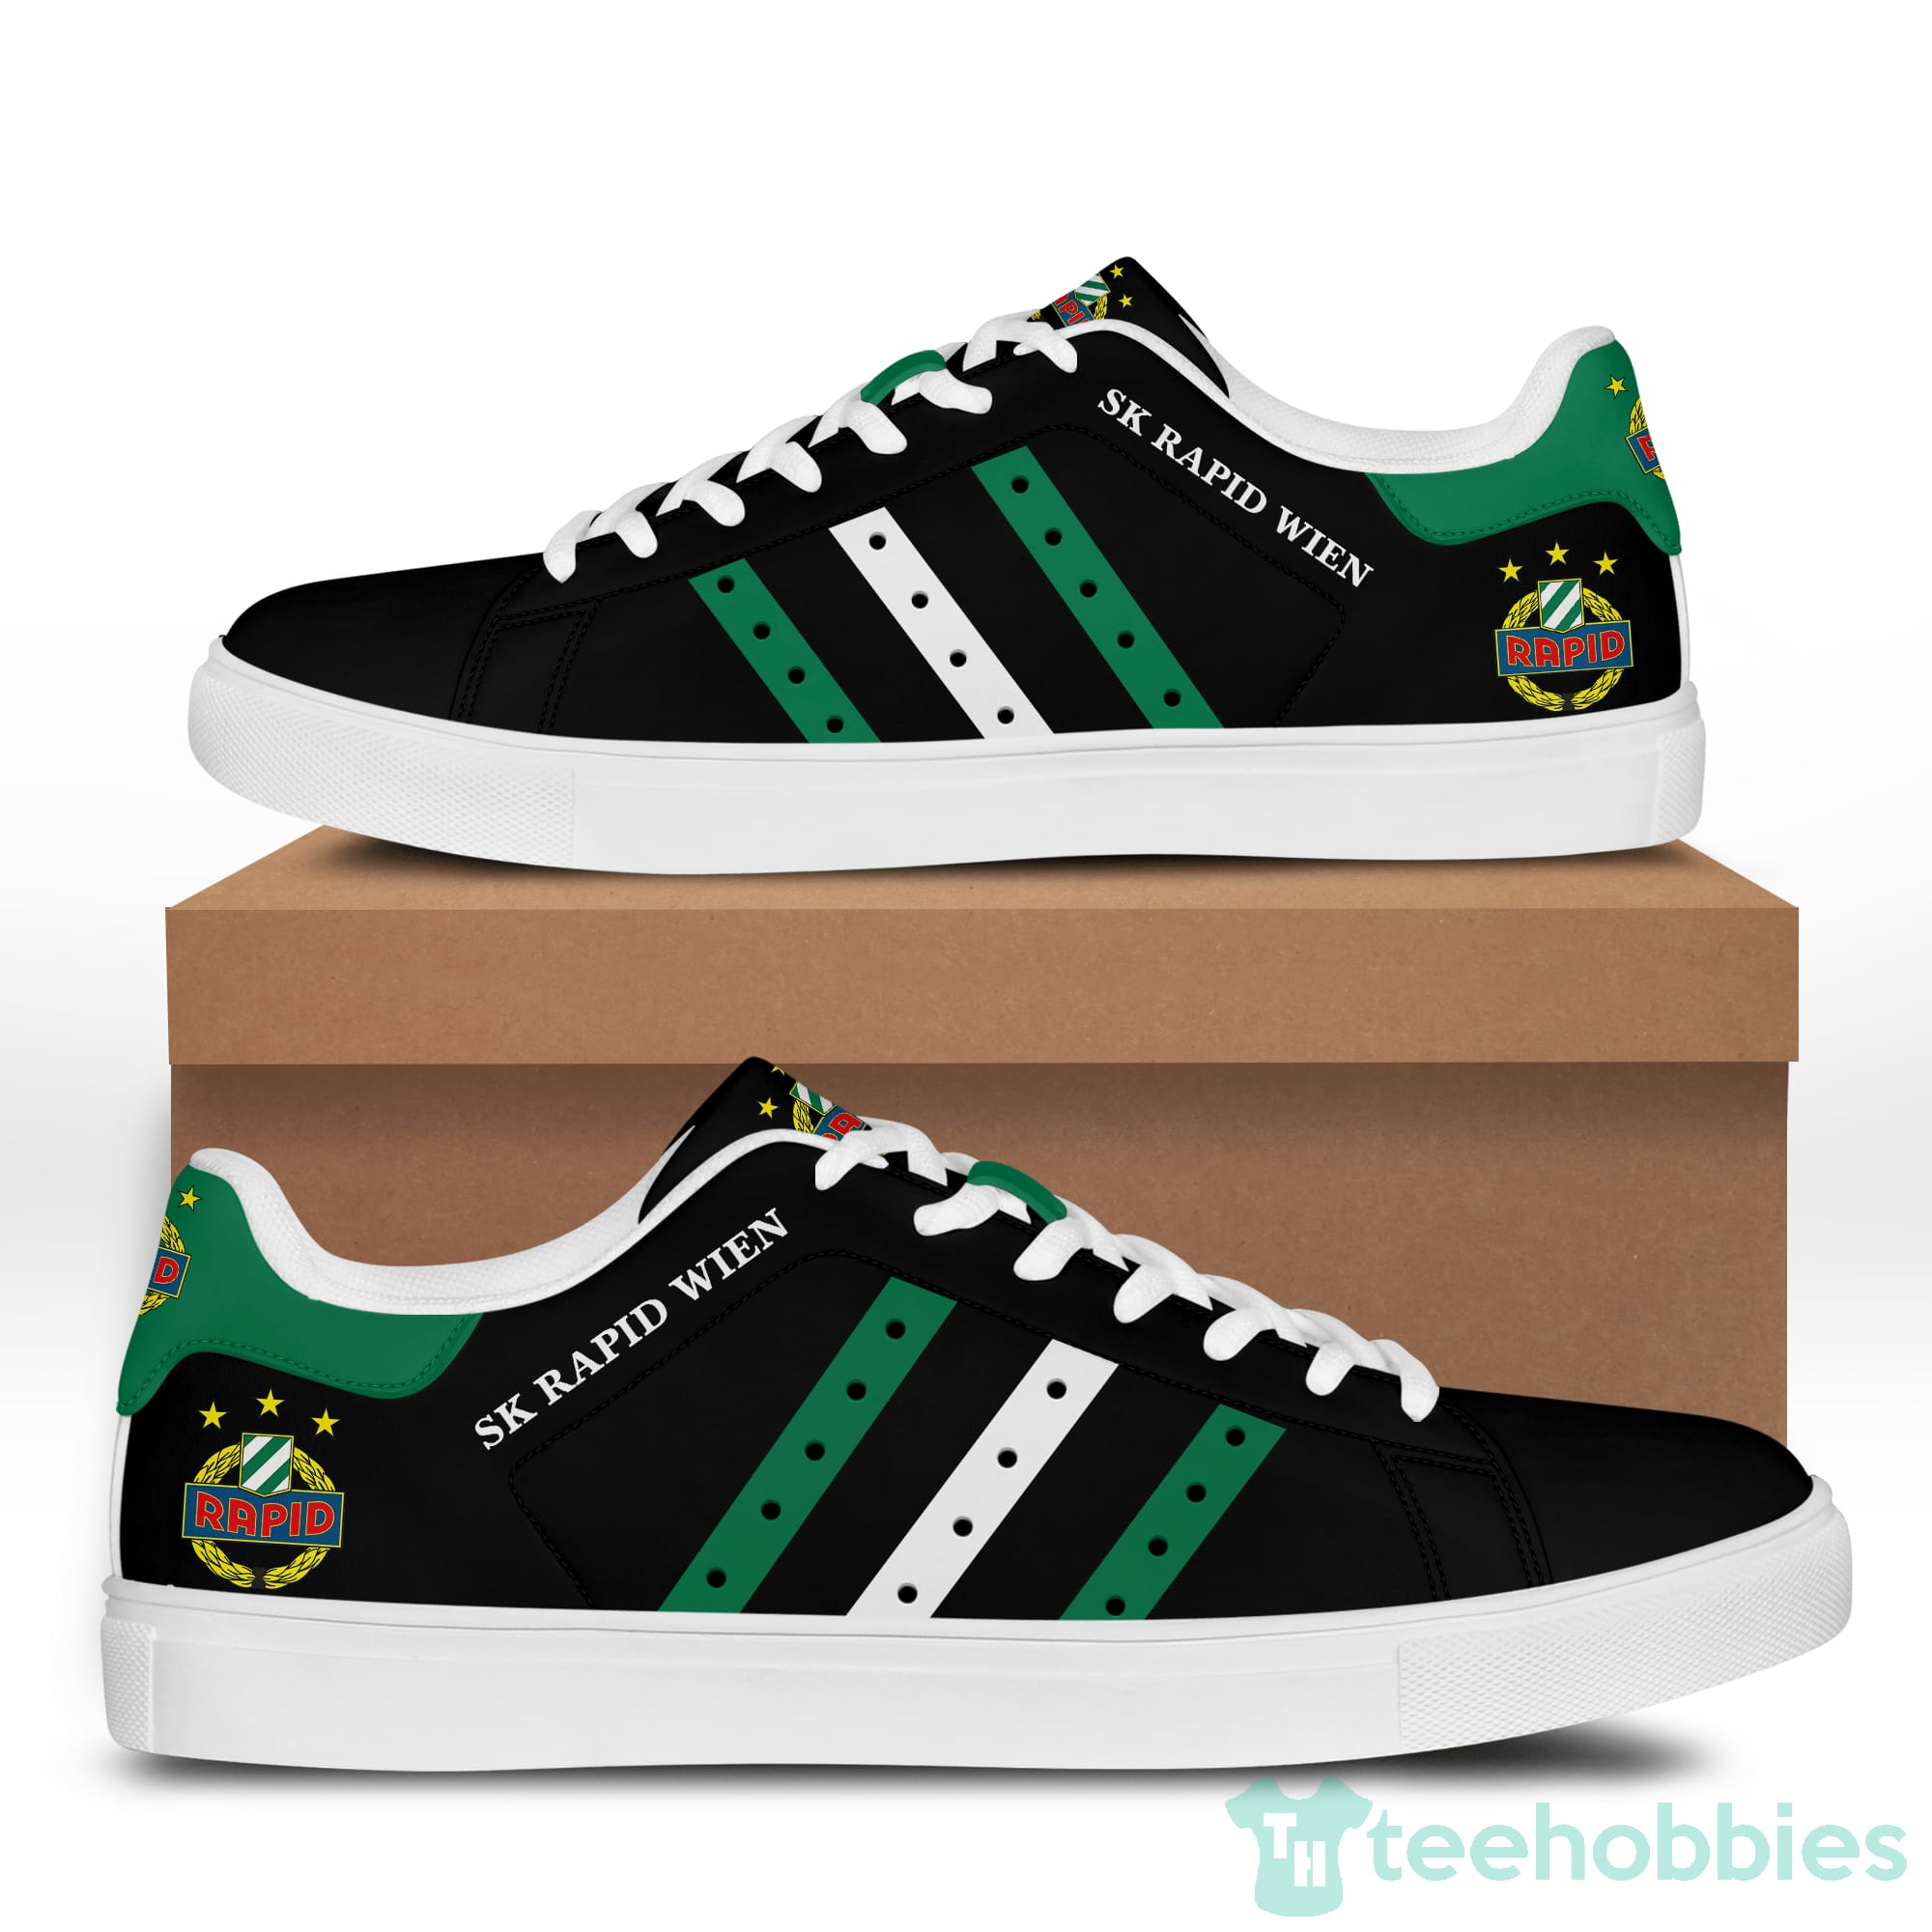 Sk Rapid Wien black And Green Low Top Skate Shoes Product photo 2